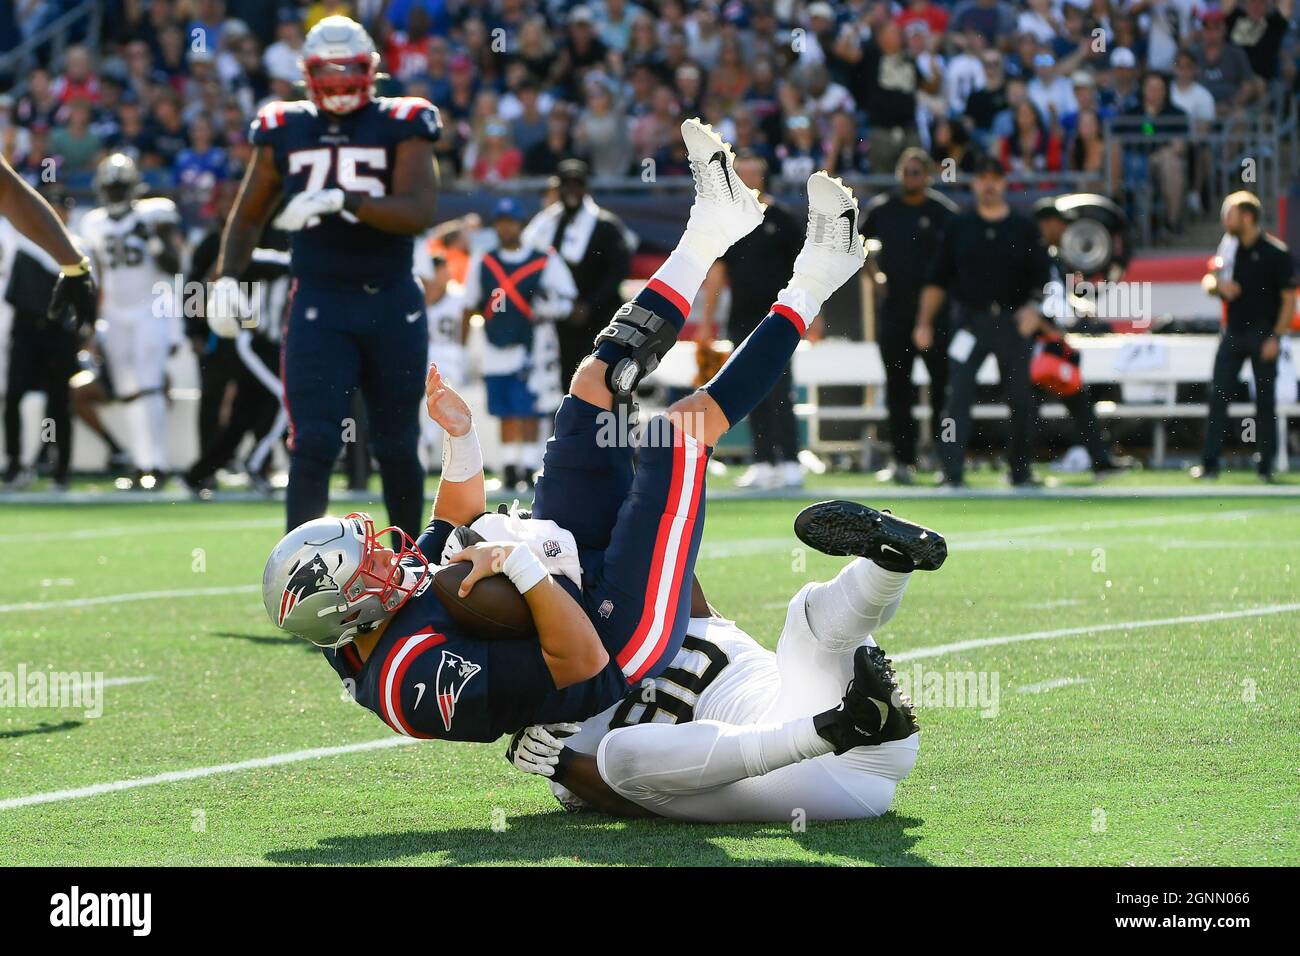 Sunday, September 26, 2021: New England Patriots quarterback Mac Jones (10)  gets sacked by New Orleans Saints defensive end Tanoh Kpassagnon (90)  during the NFL football game between the New Orleans Saints